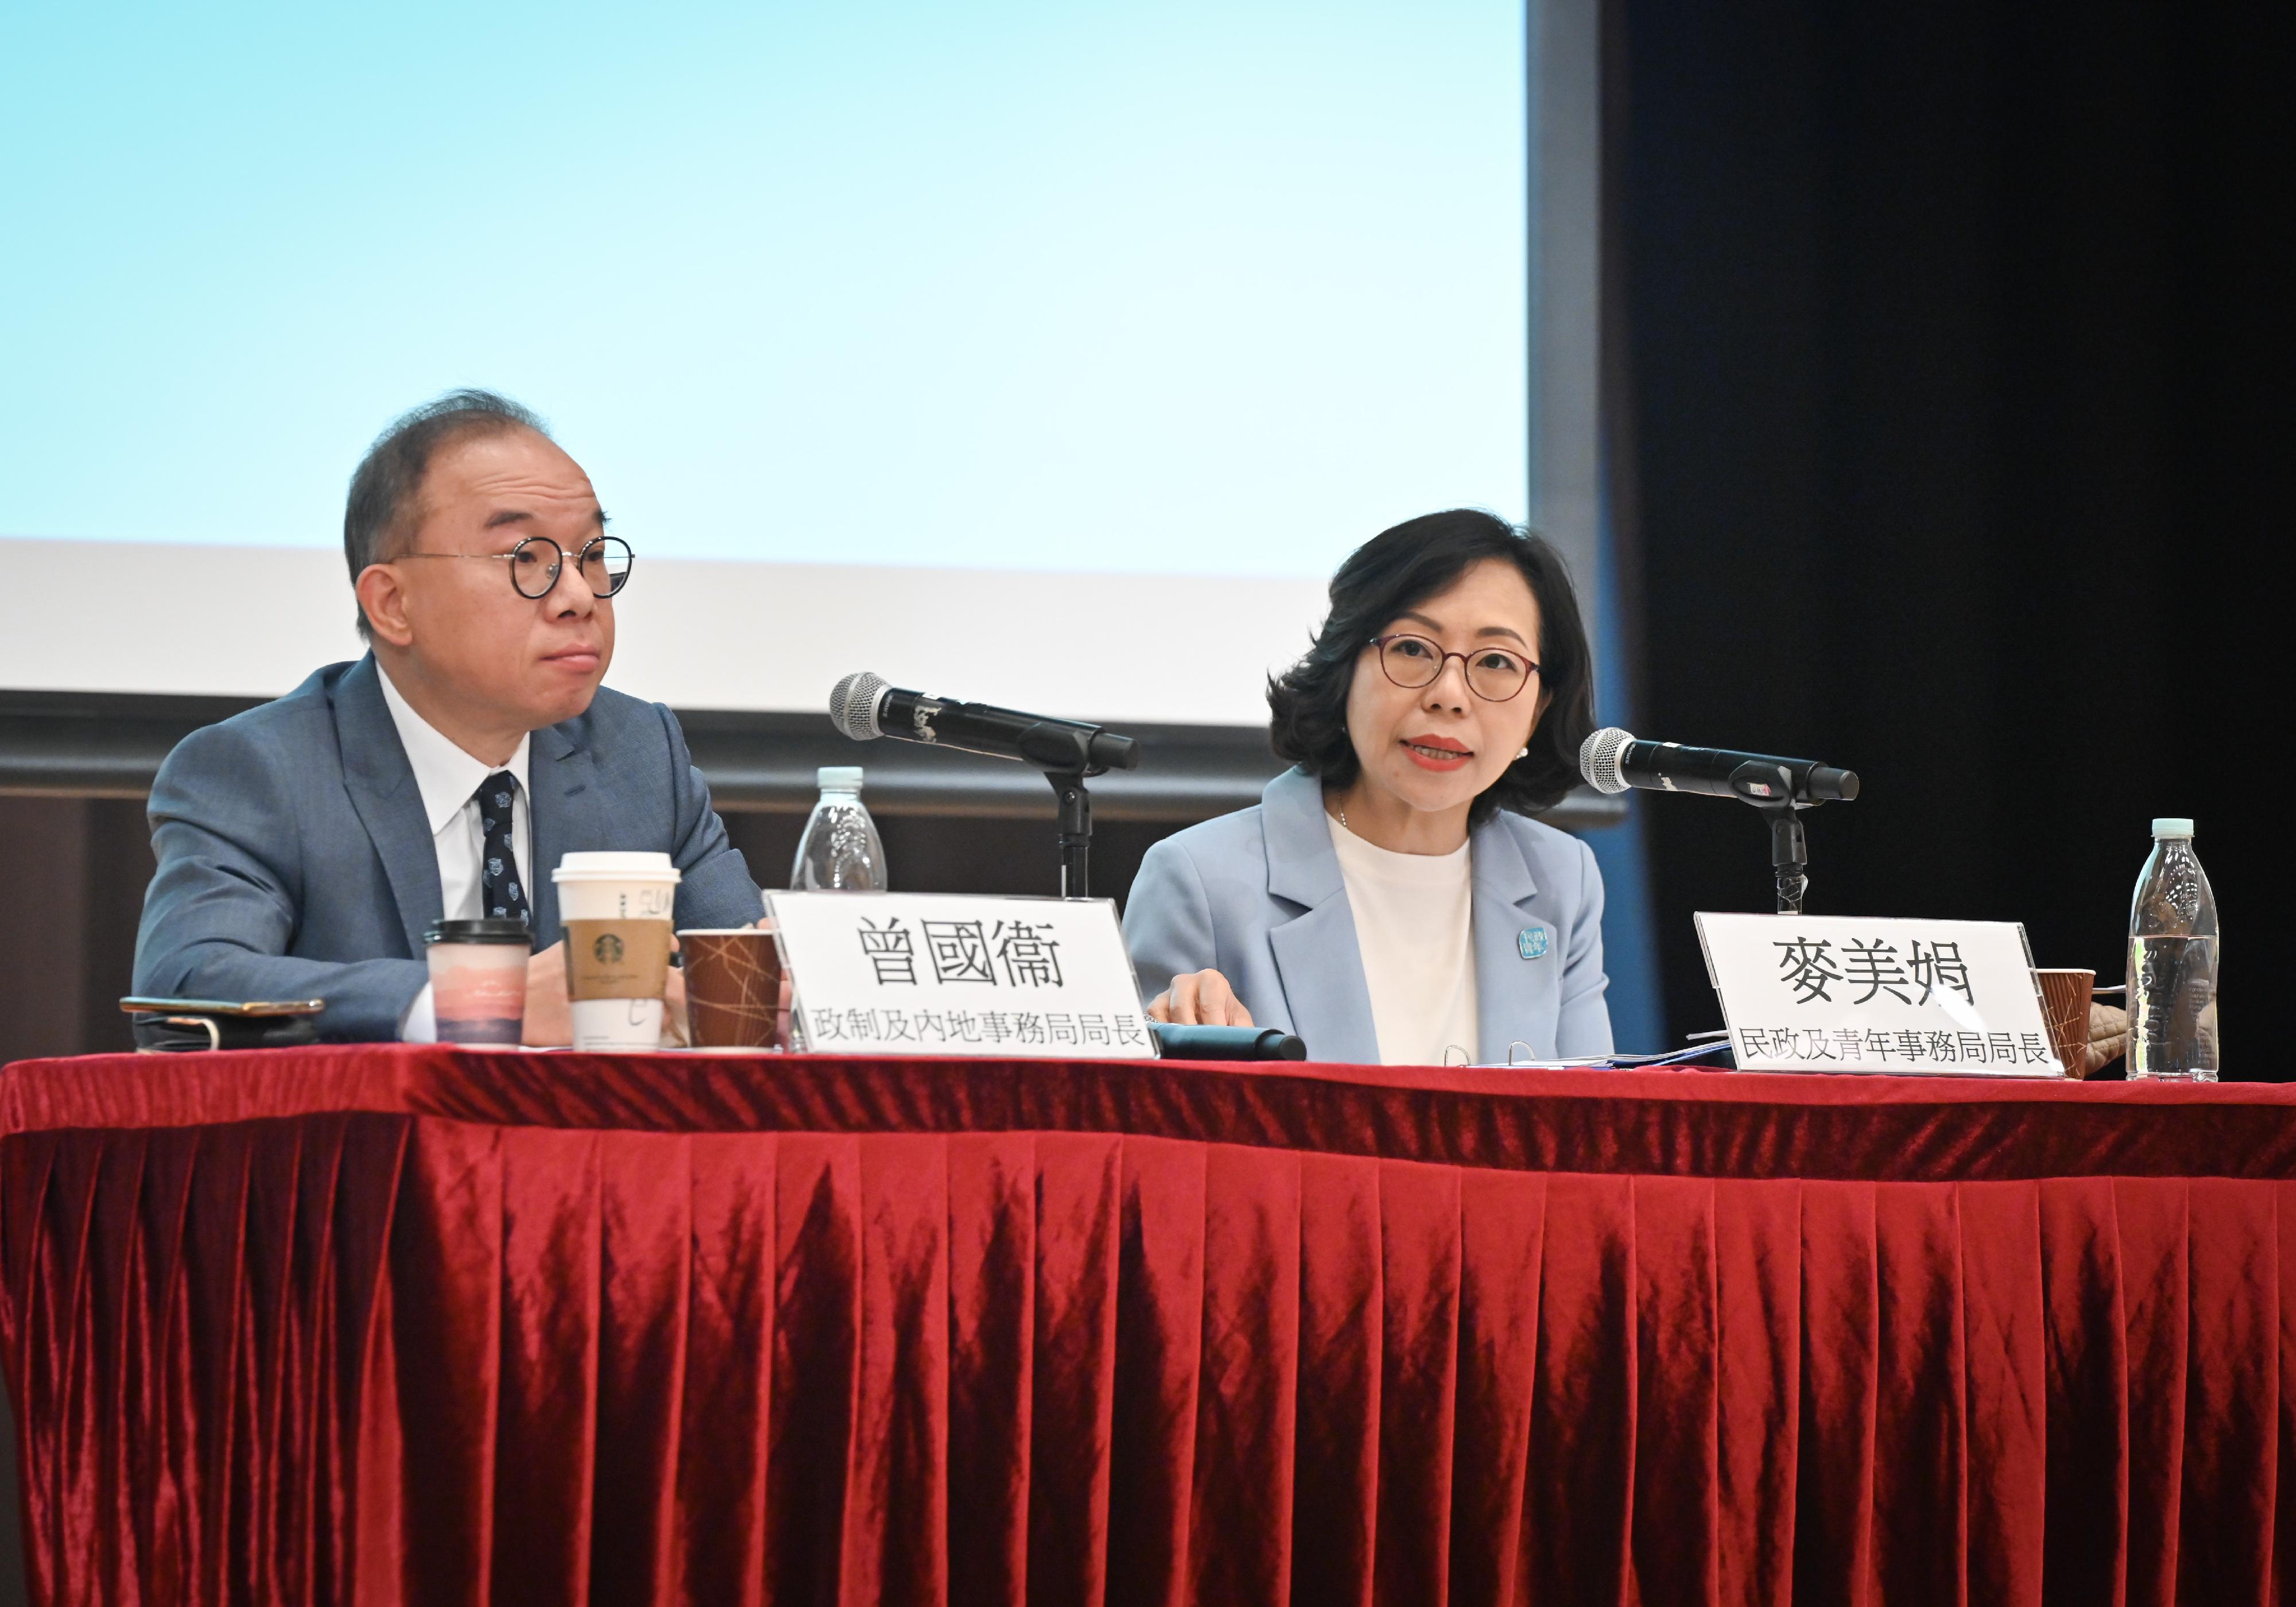 The Secretary for Constitutional and Mainland Affairs, Mr Erick Tsang Kwok-wai, and the Secretary for Home and Youth Affairs, Miss Alice Mak, today (May 15) briefed district representatives on the proposals to improve governance at the district level. Photo shows Mr Tsang (left) and Miss Mak briefing district representatives on the proposals.